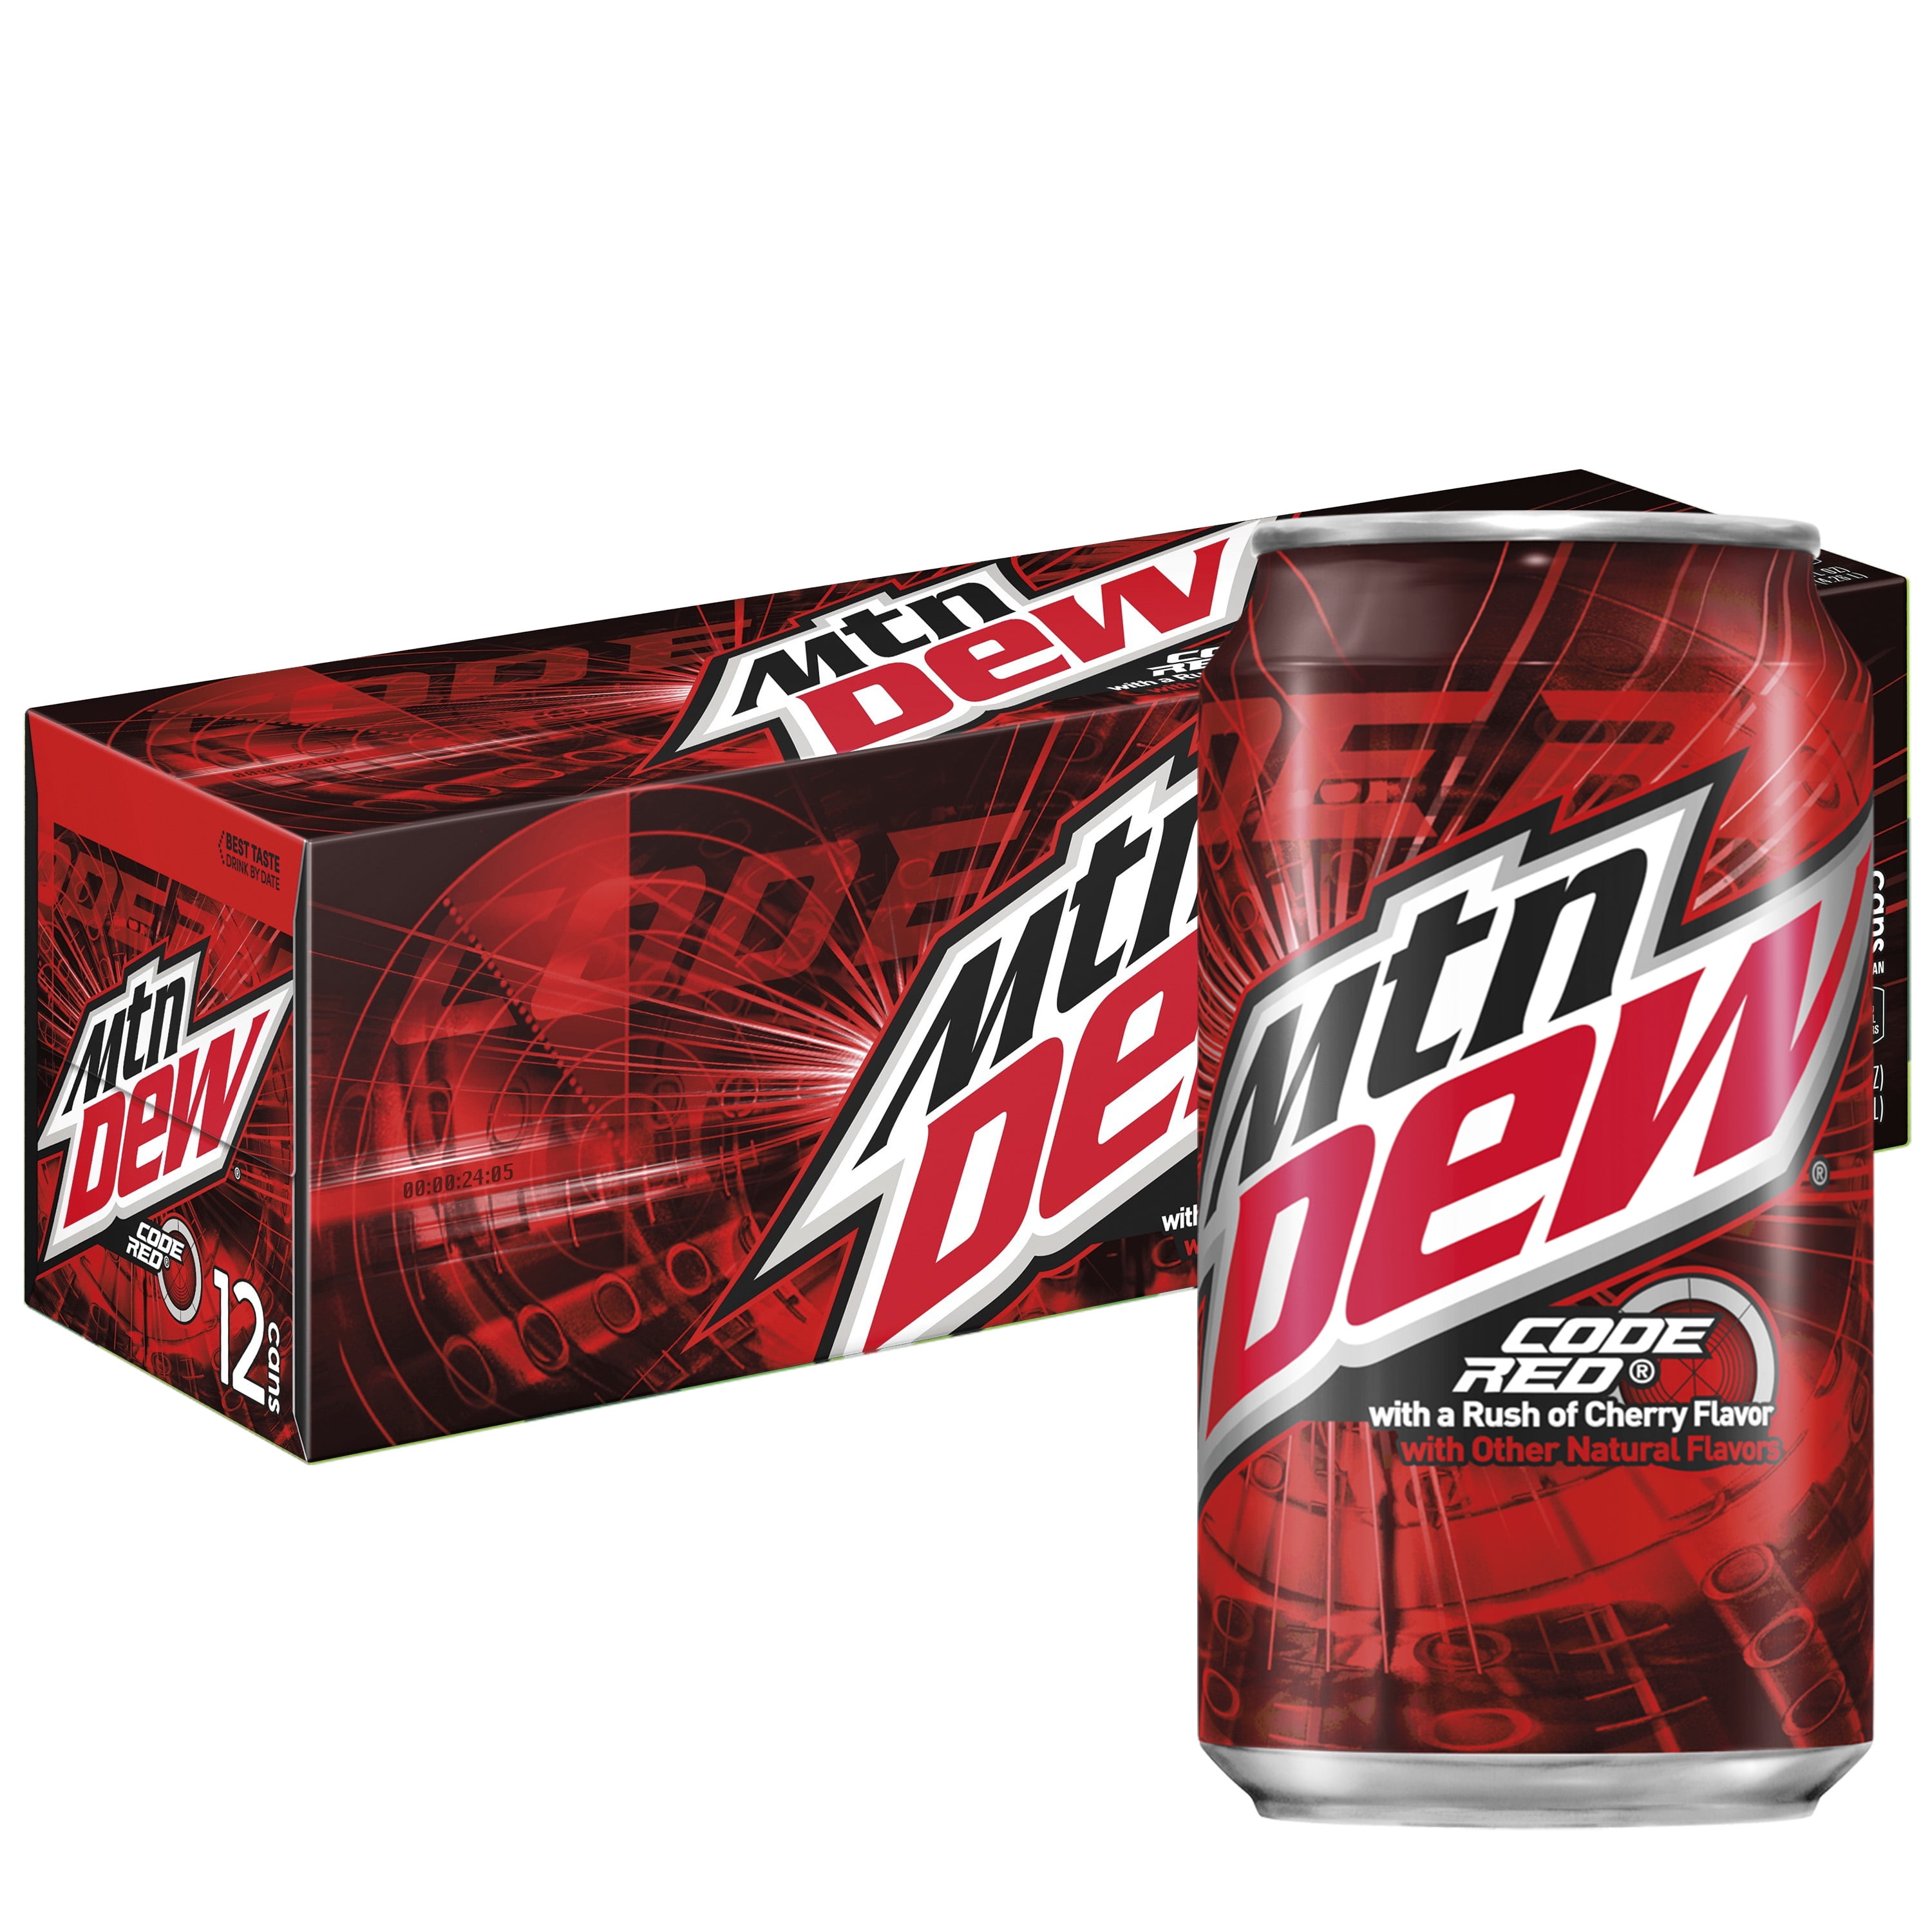 Mountain Dew Code Red Cherry Flavored Soda Pop 12 Oz 12 Pack Cans Walmart Com